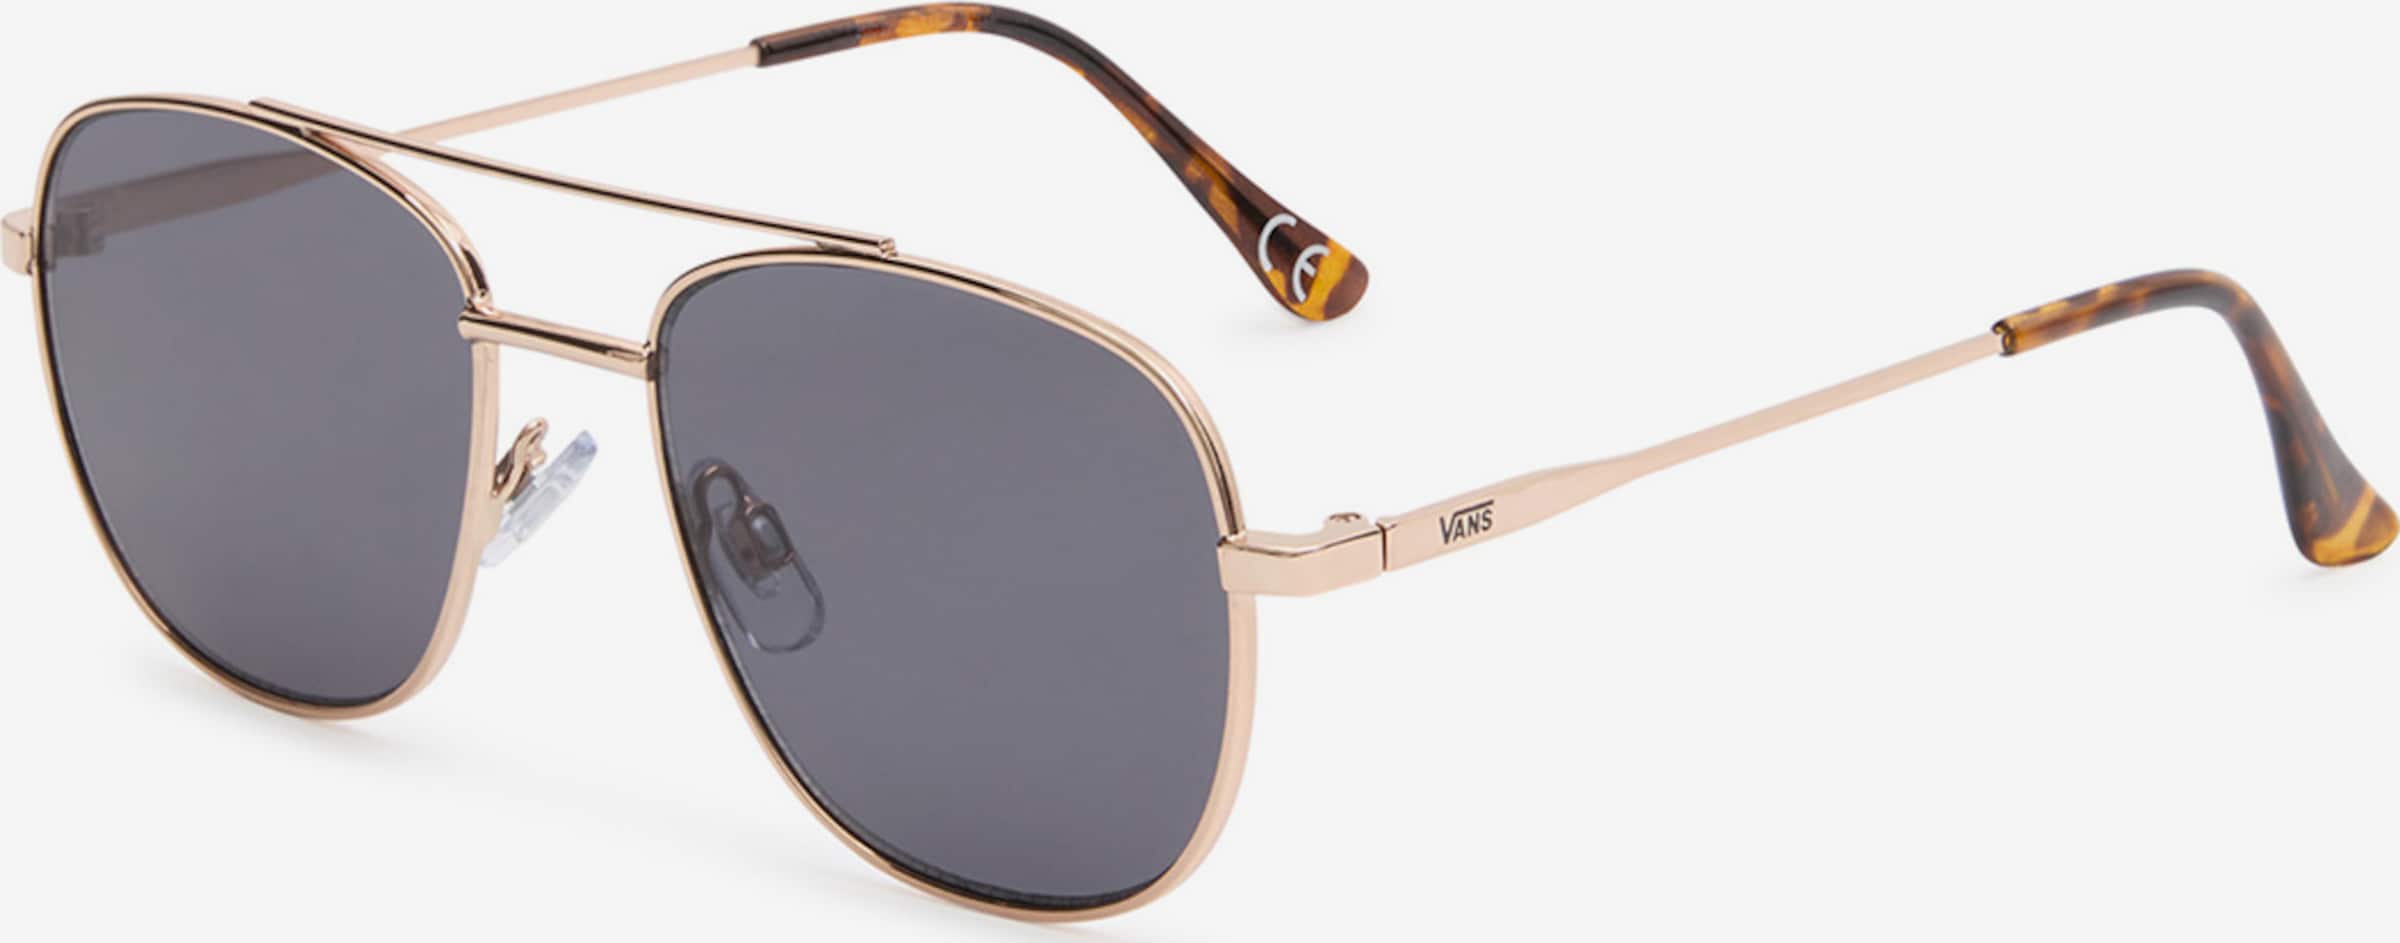 VANS Sonnenbrille in Gold | ABOUT YOU